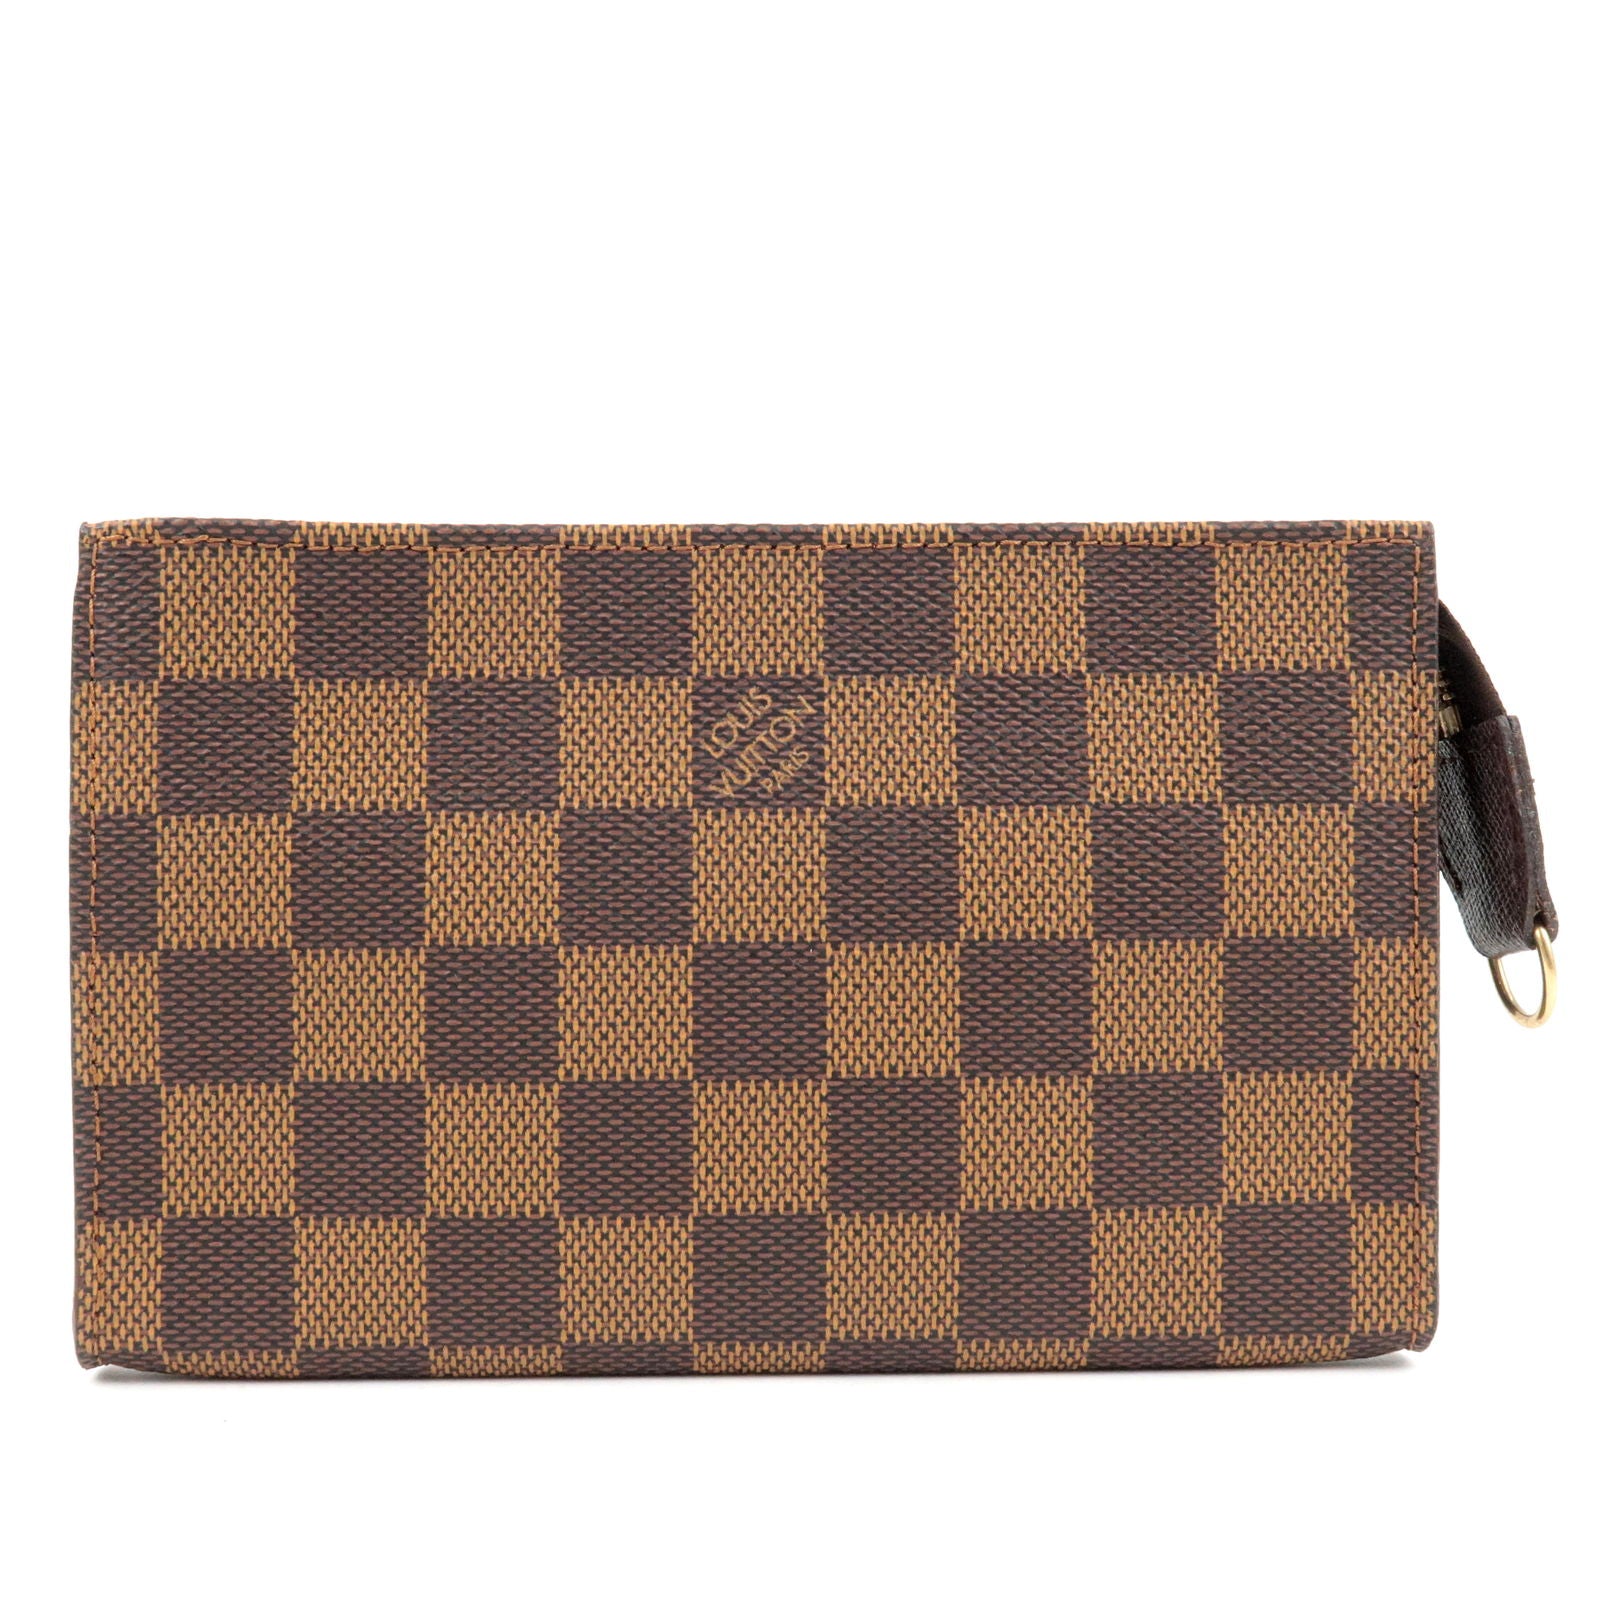 for - Bag - Vuitton - ep_vintage luxury Store - Pouch - Damier